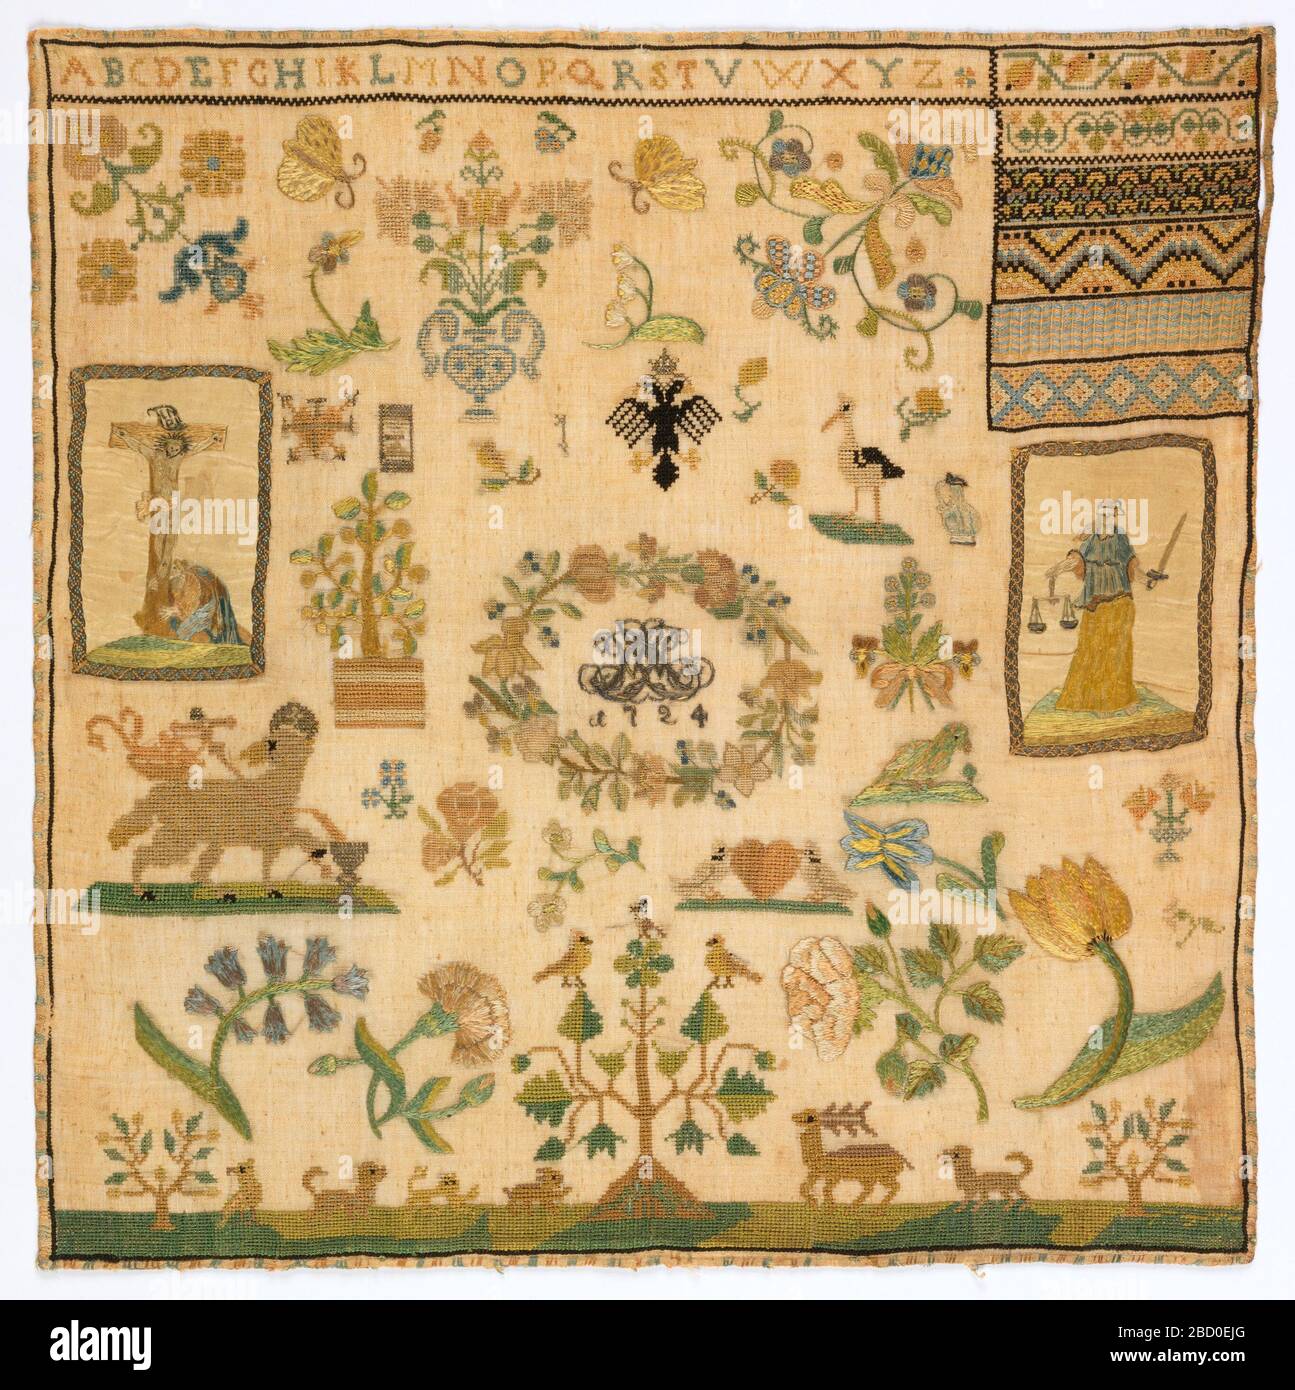 Sampler. Research in ProgressAlphabet at top. Box of pattern at upper right. Field filled with floral motifs. At left, applique of a silk picture of Christ on the cross. At right, applique of a silk picture of Justice. Sampler Stock Photo